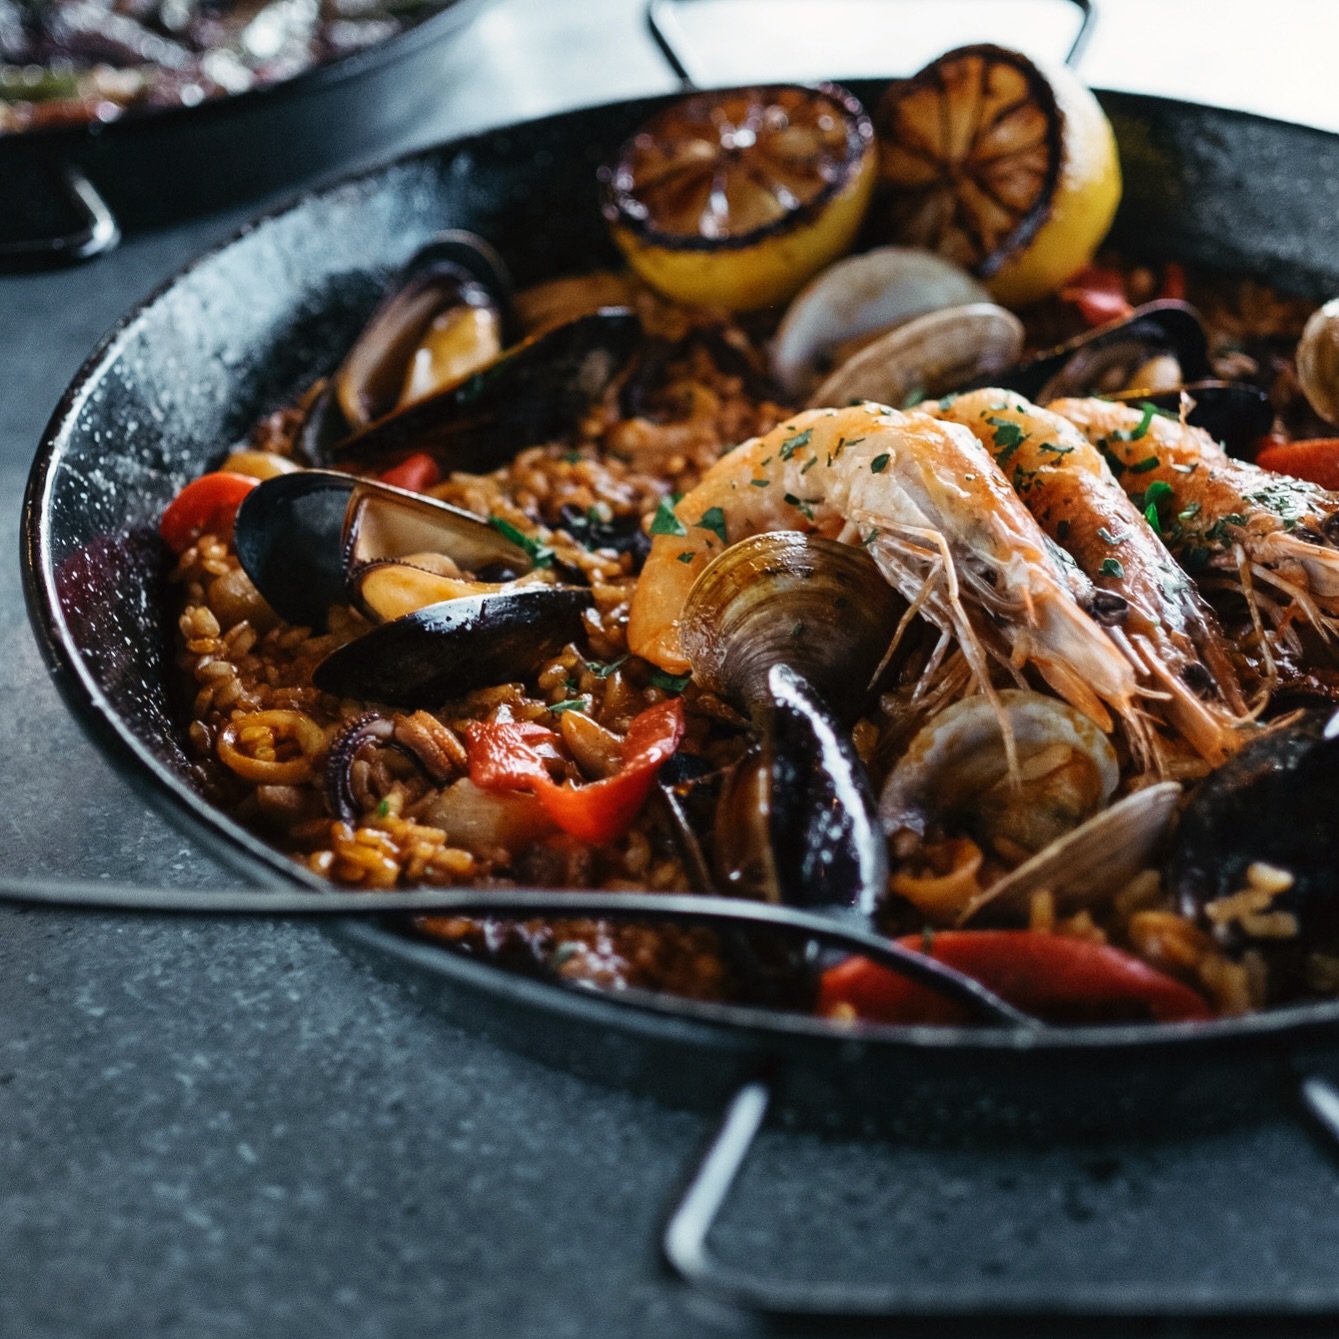 Last call!! 🦐🥘🇪🇸

PAELLA NIGHTS tonight from 5pm, get your fix!

Mariscos, Pollo &amp;/or Vegetariano (vegan)!

Part of a 4- (5??) course feast!

Walk-in or reserve @opentable 

#paellanights
#saturdaynight
#gambasgambasgambas